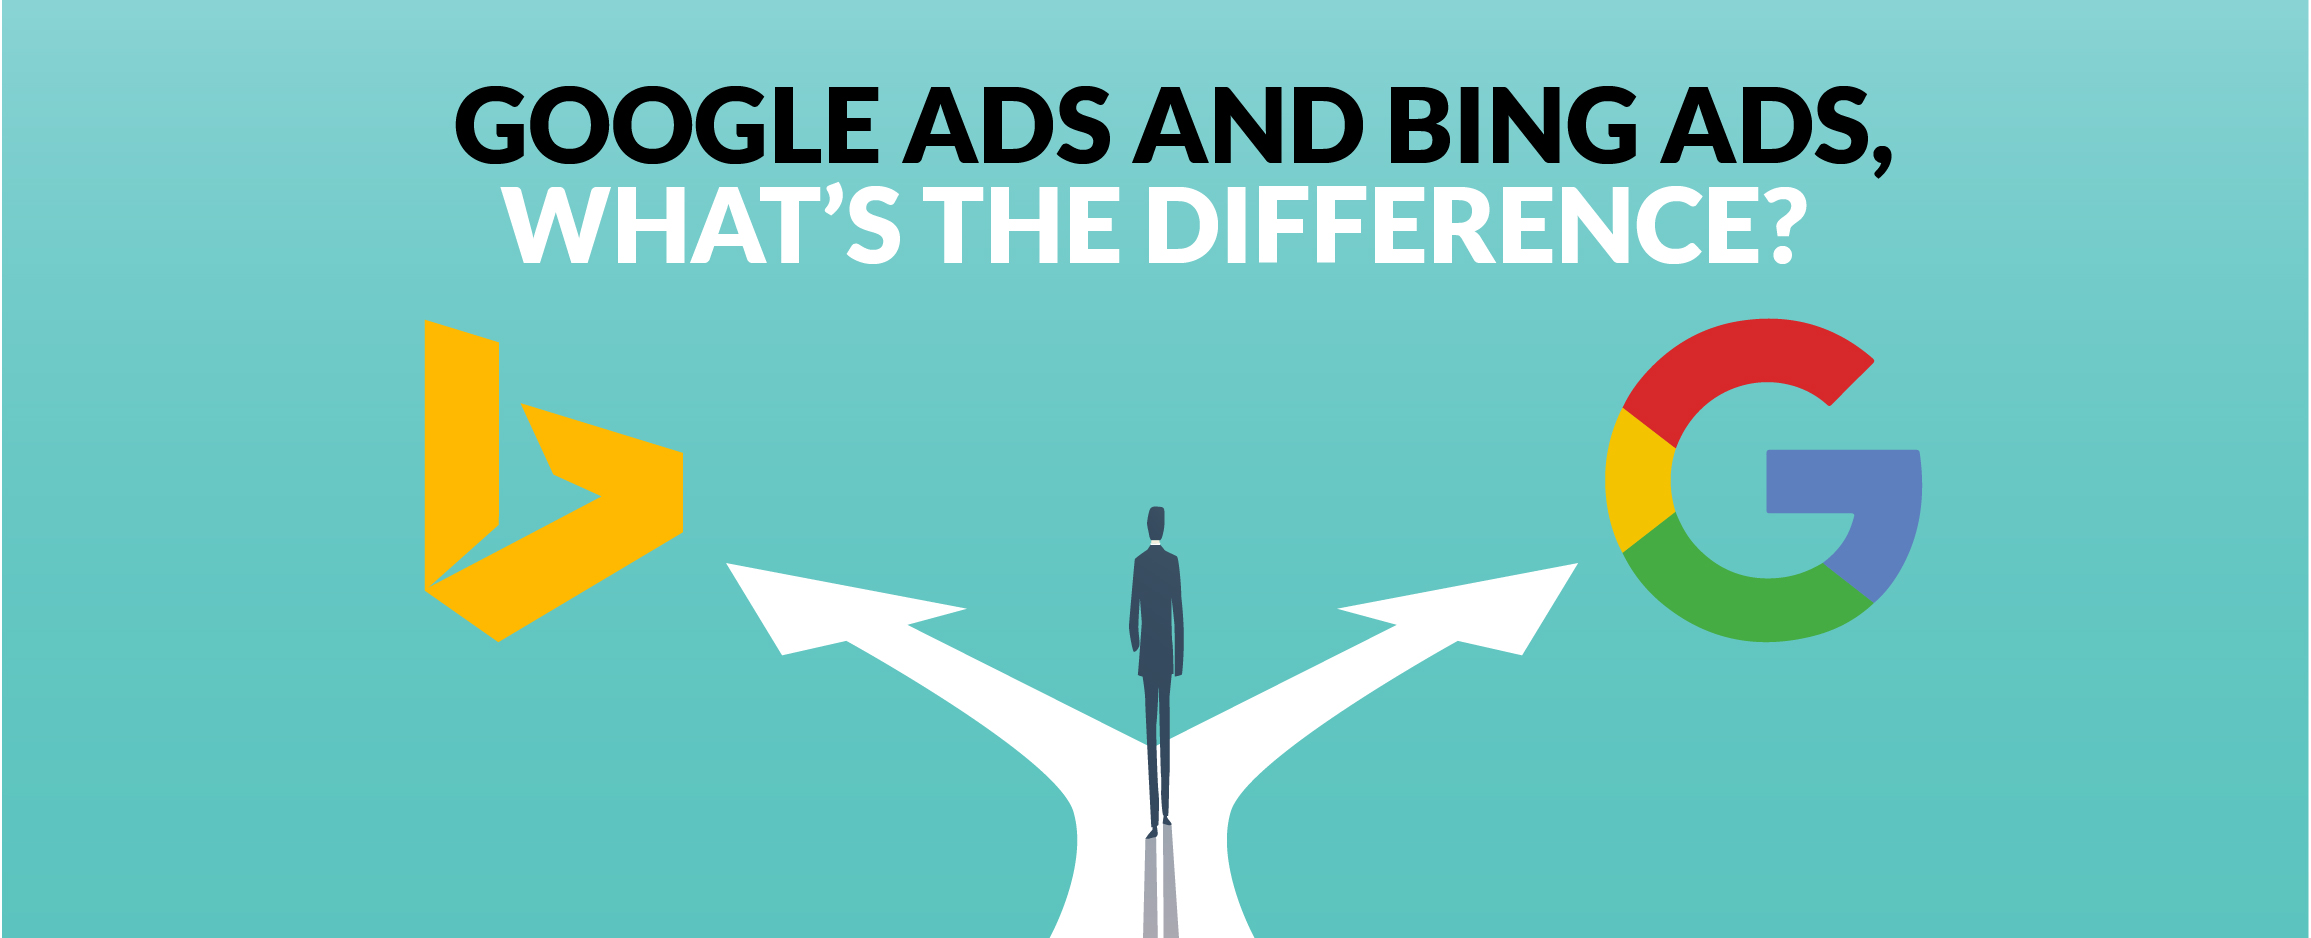 Google Ads and Bing Ads, what’s the difference?